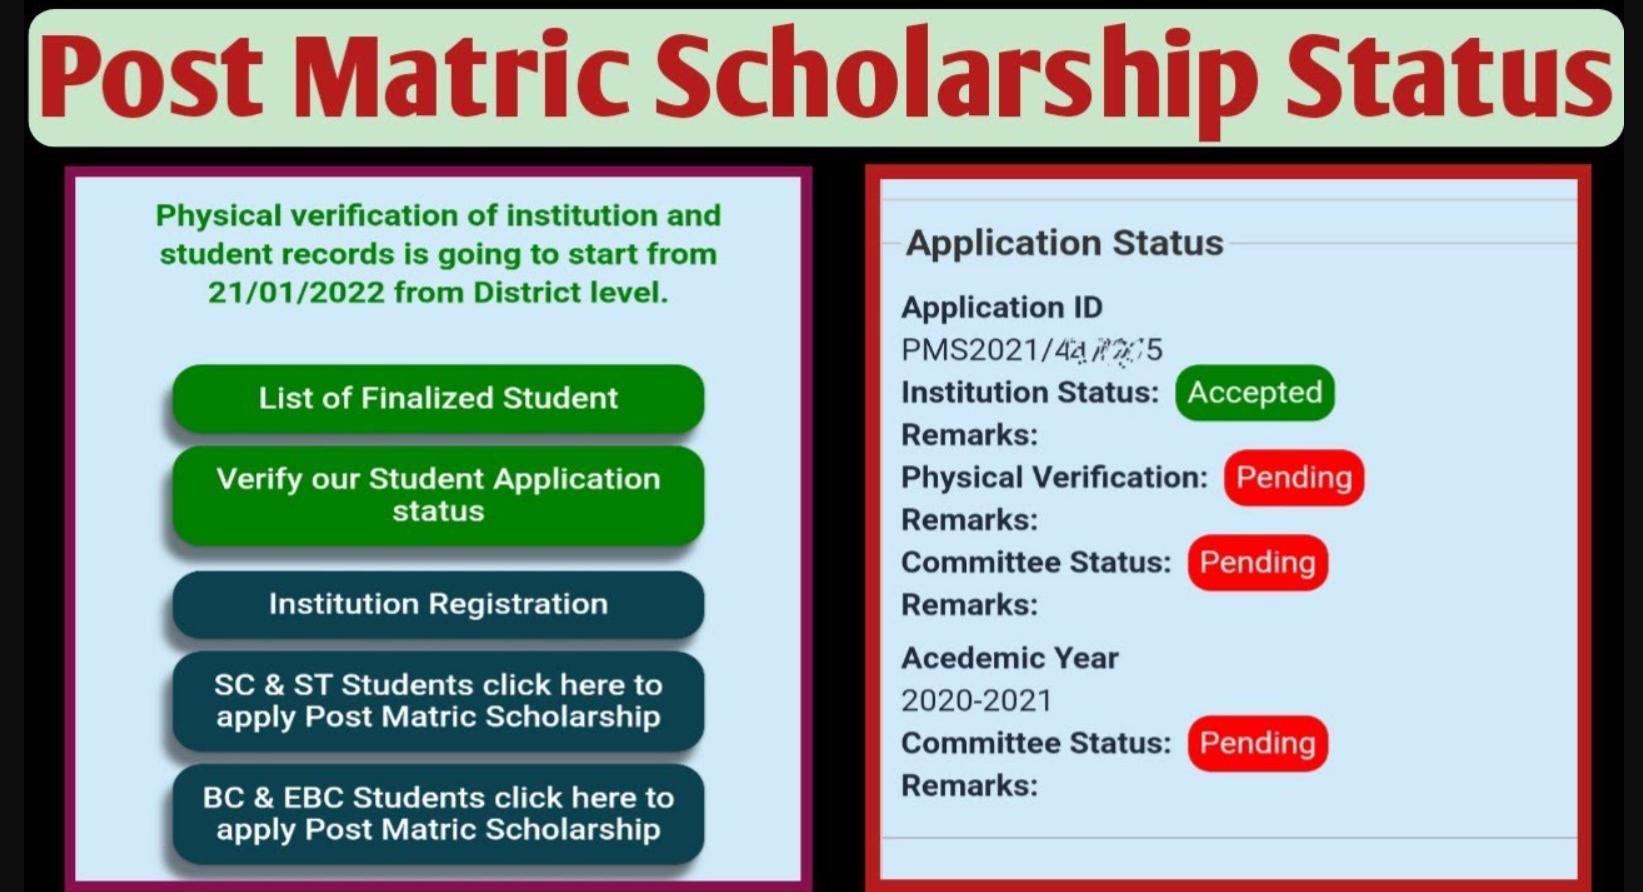 Post Matric Scholarship - How to Find a scholarship after Metric?